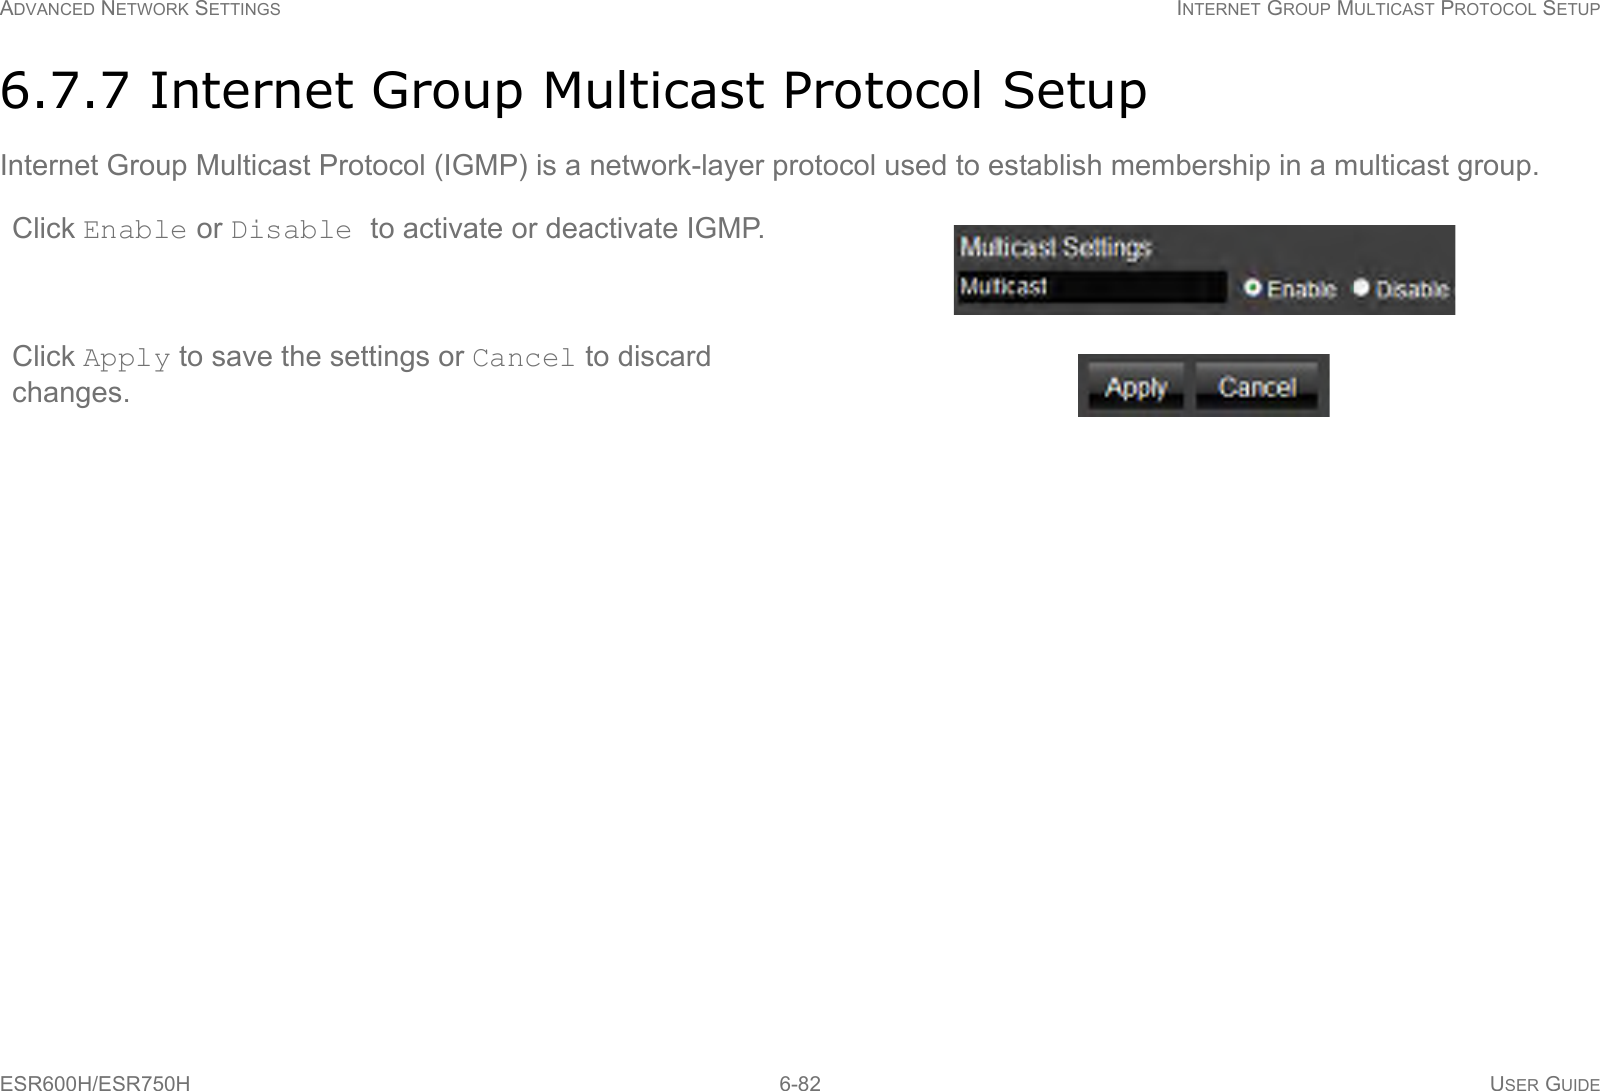 ADVANCED NETWORK SETTINGS INTERNET GROUP MULTICAST PROTOCOL SETUPESR600H/ESR750H 6-82 USER GUIDE6.7.7 Internet Group Multicast Protocol SetupInternet Group Multicast Protocol (IGMP) is a network-layer protocol used to establish membership in a multicast group.Click Enable or Disable to activate or deactivate IGMP.Click Apply to save the settings or Cancel to discard changes.